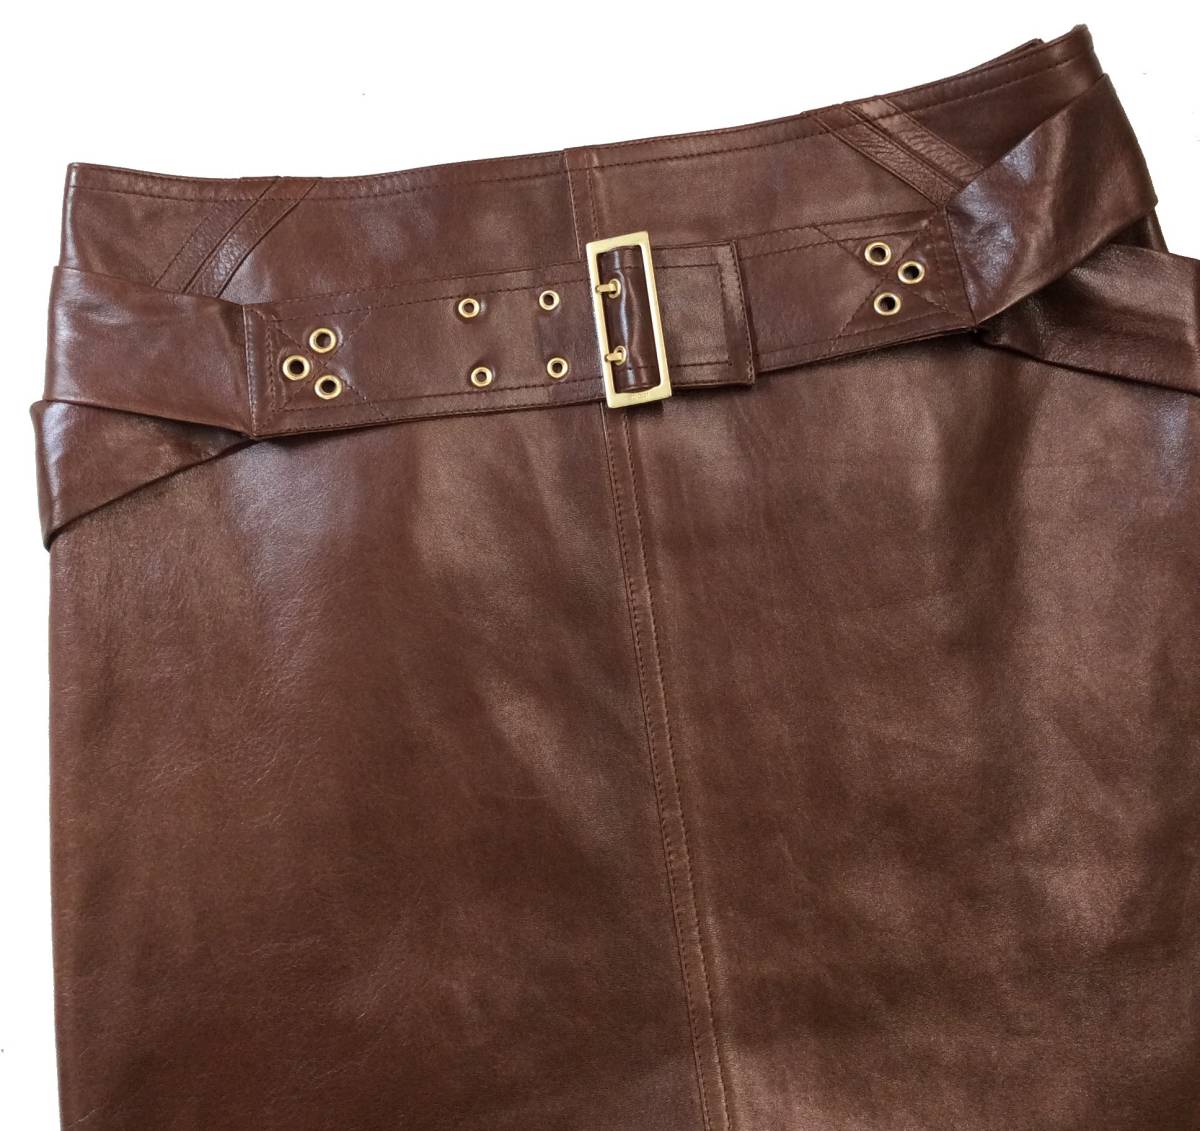 GUCCI Gucci ITALY made sheep leather leather skirt belt attaching Brown tight skirt lady's 42 (ma)